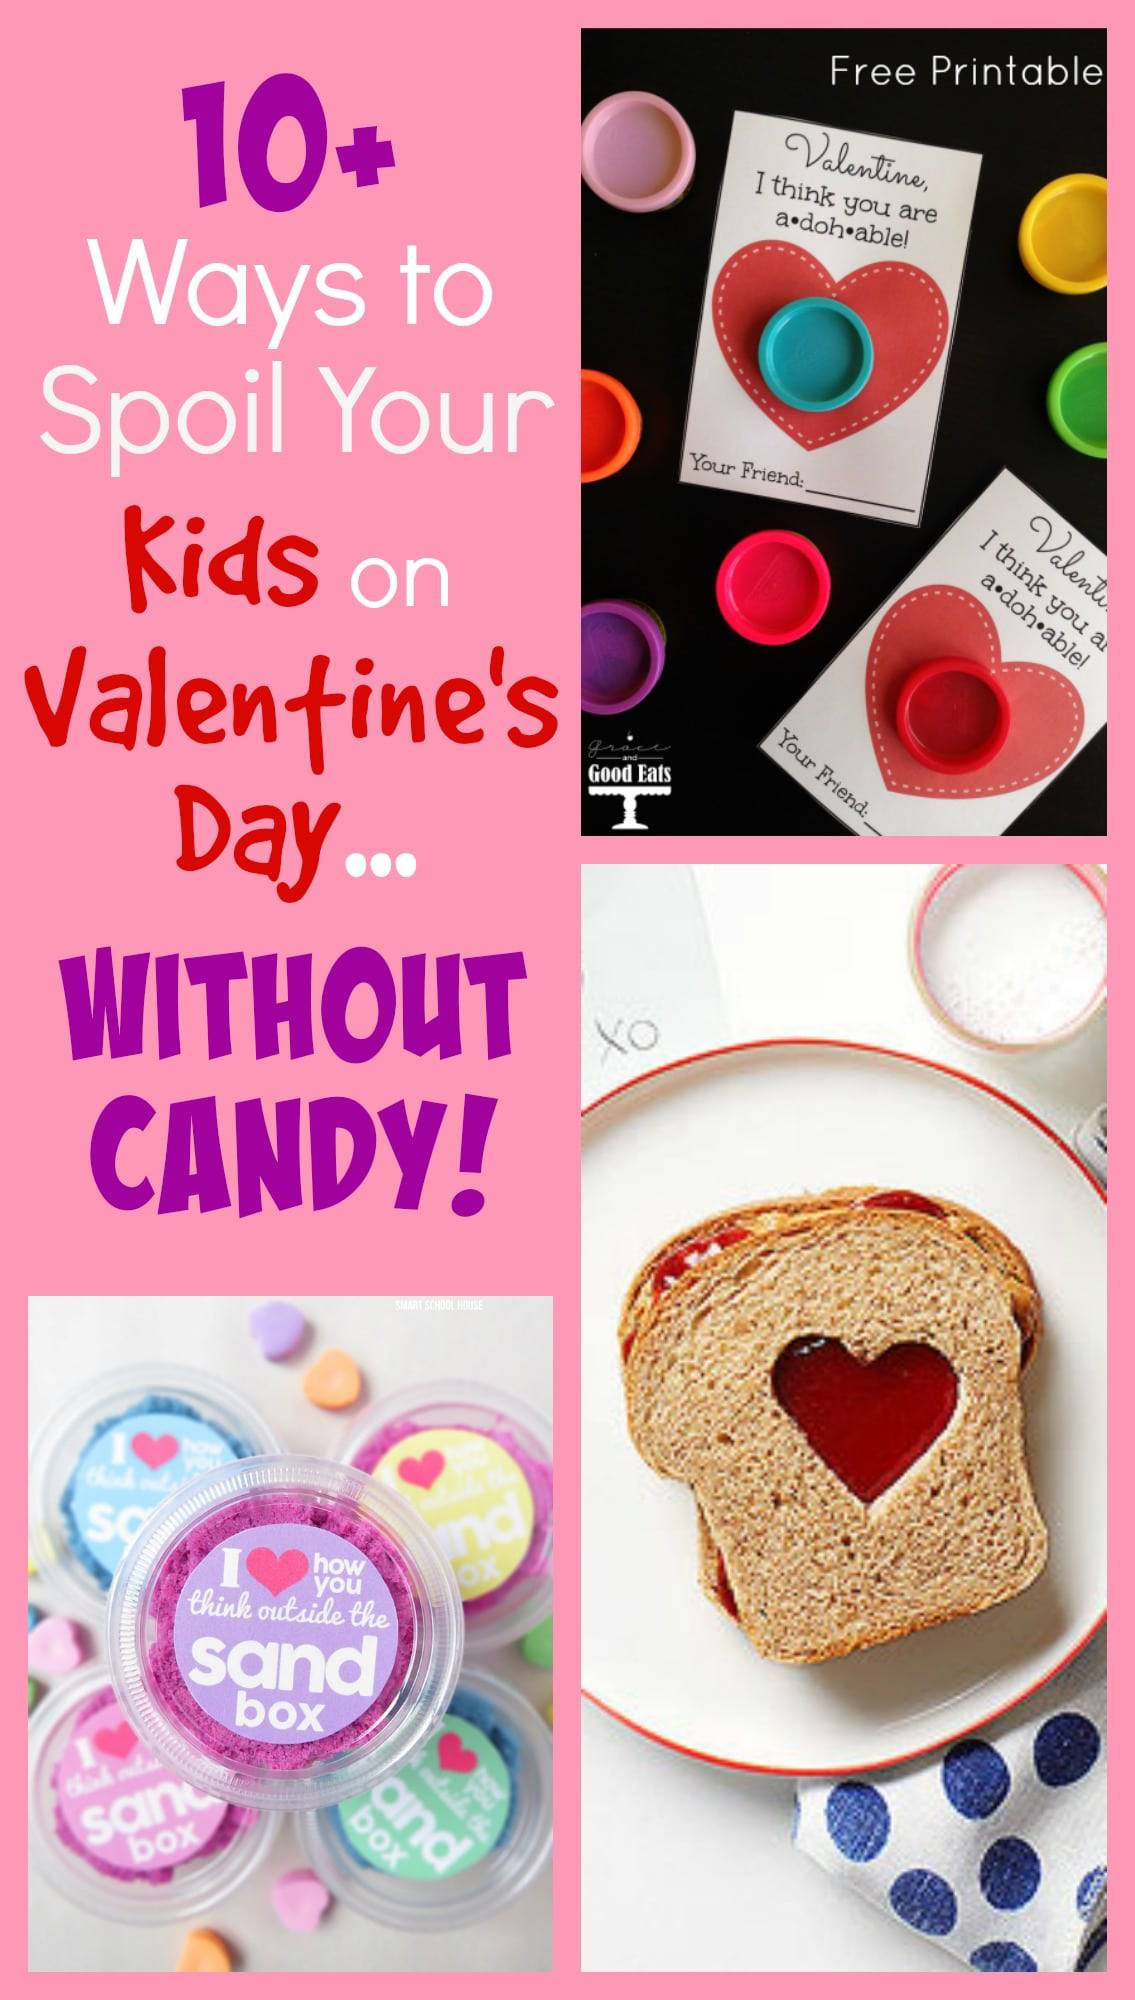 Valentines Day Candy Gift Ideas
 10 Ways to Spoil Your Kids on Valentine s Day Without